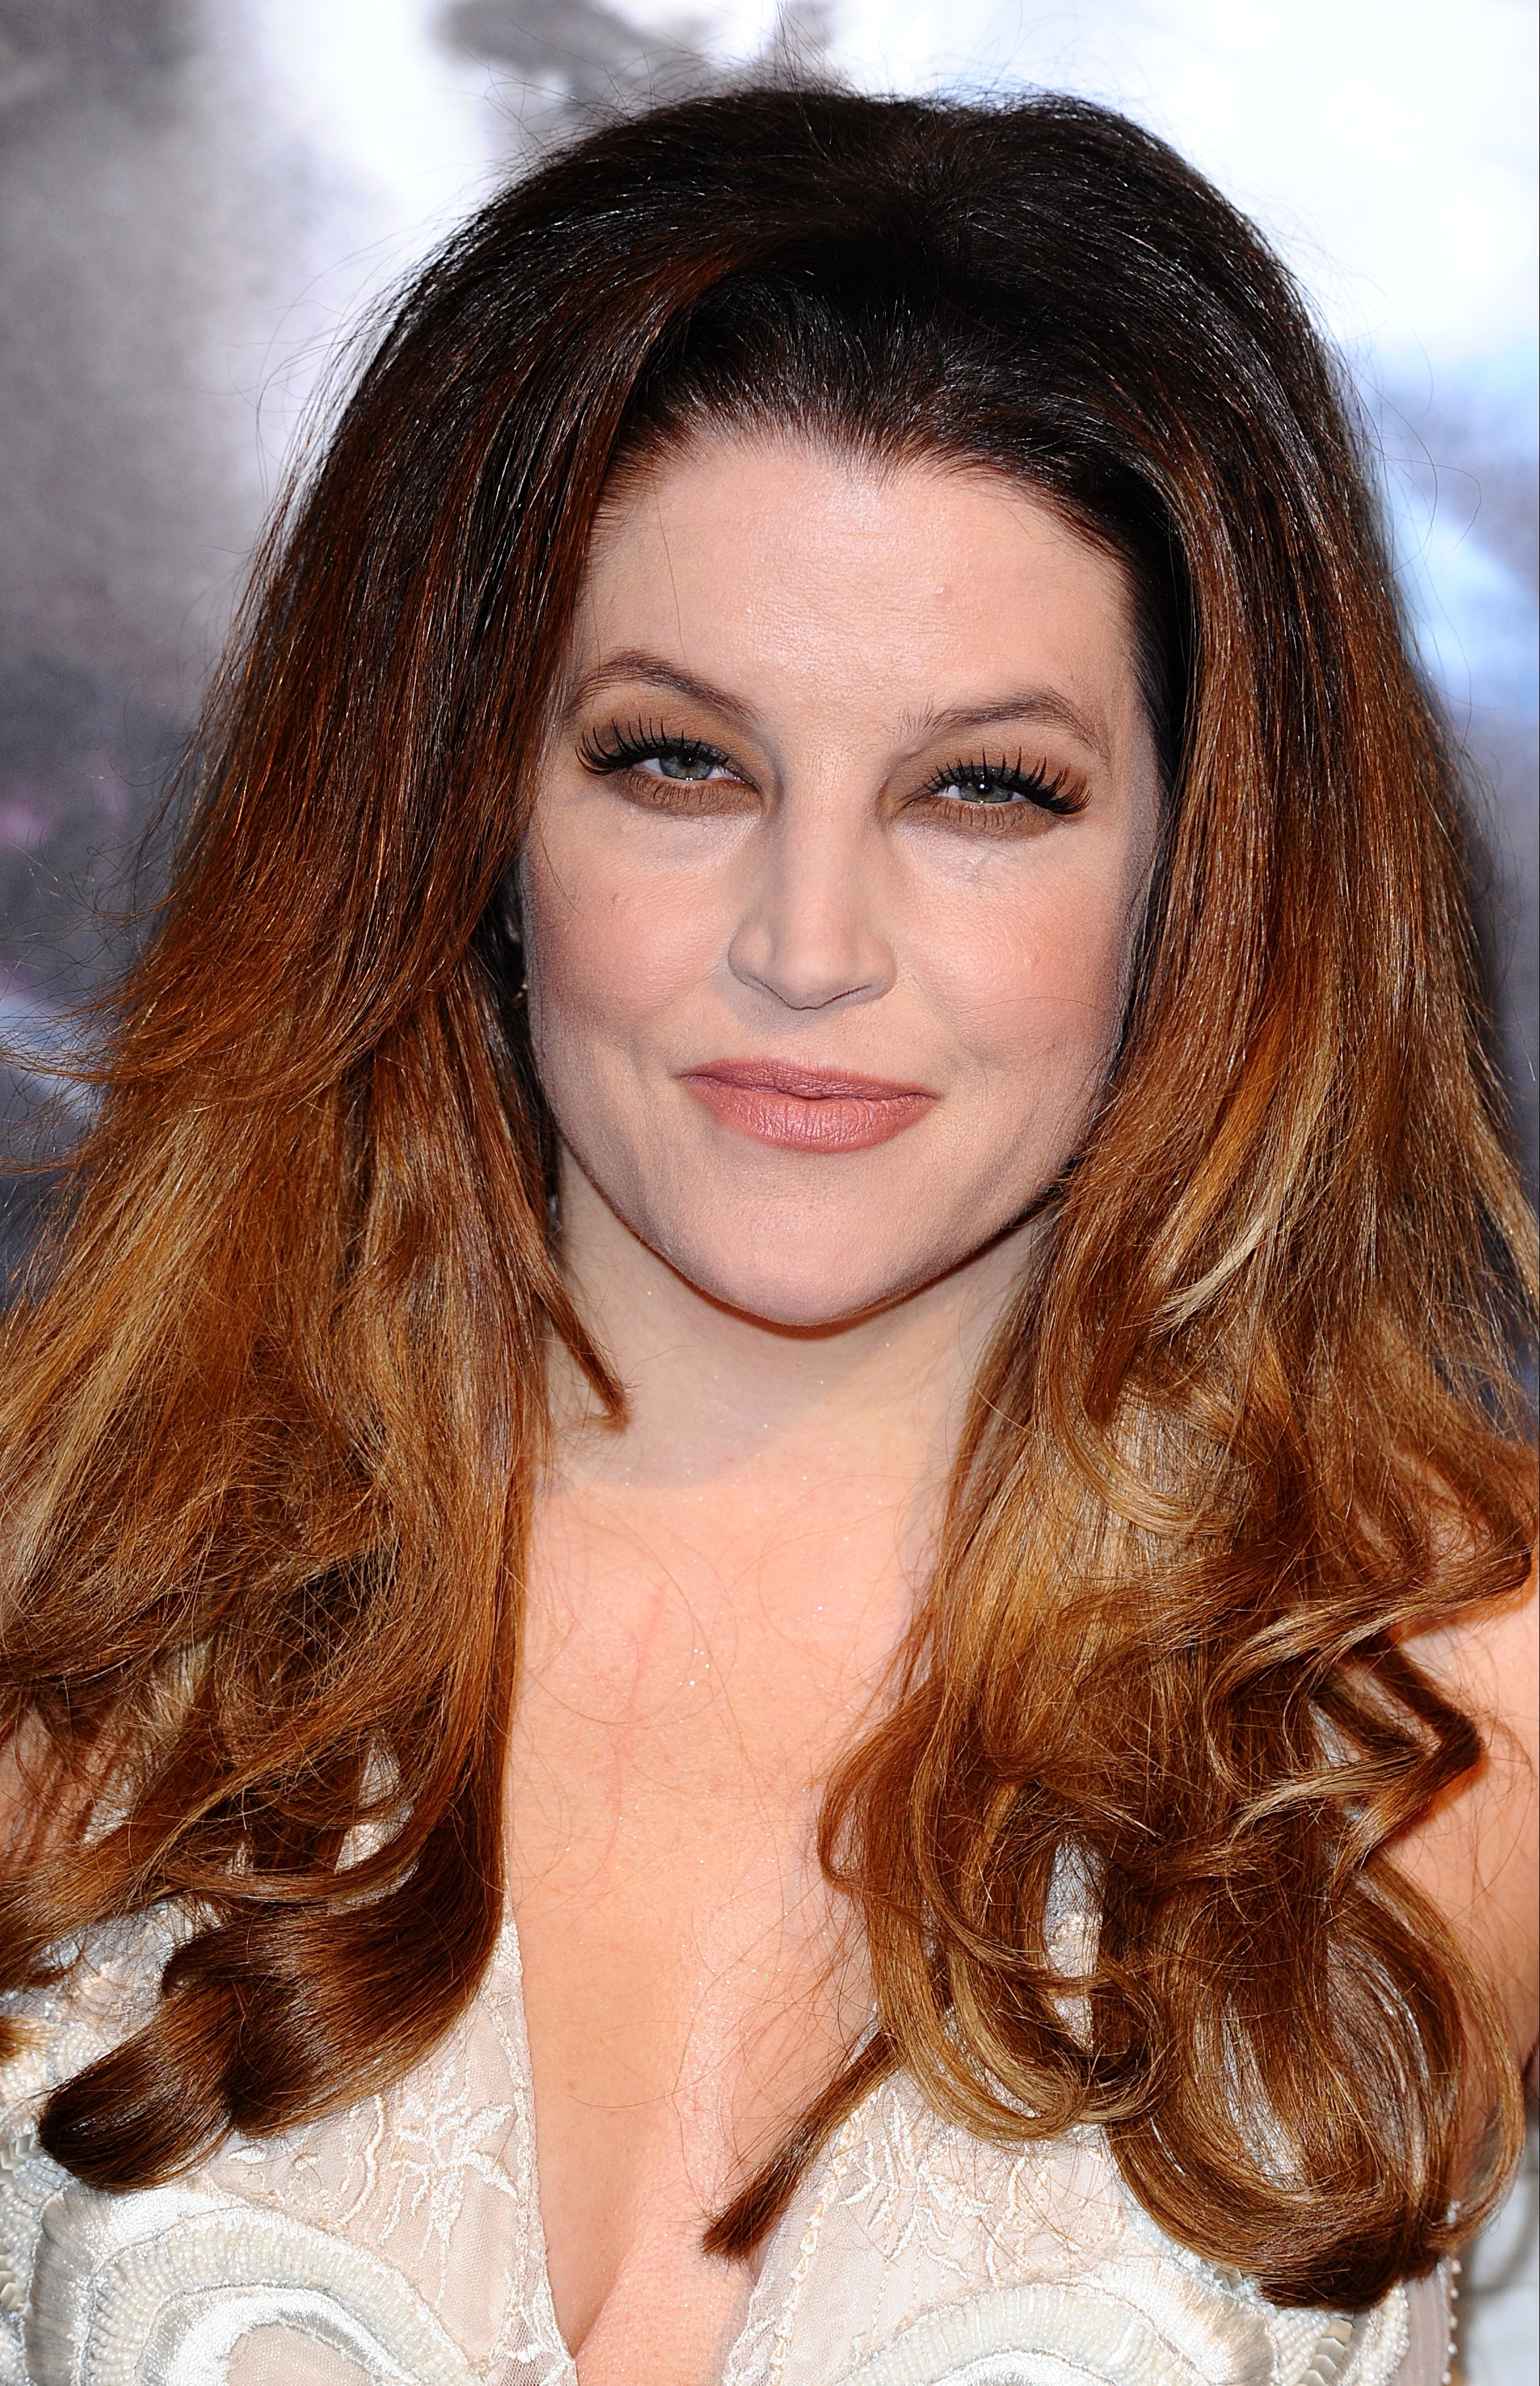 Lisa Marie Presley, who was the only child of Elvis Presley, had died aged 54, hours after being taken to hospital.